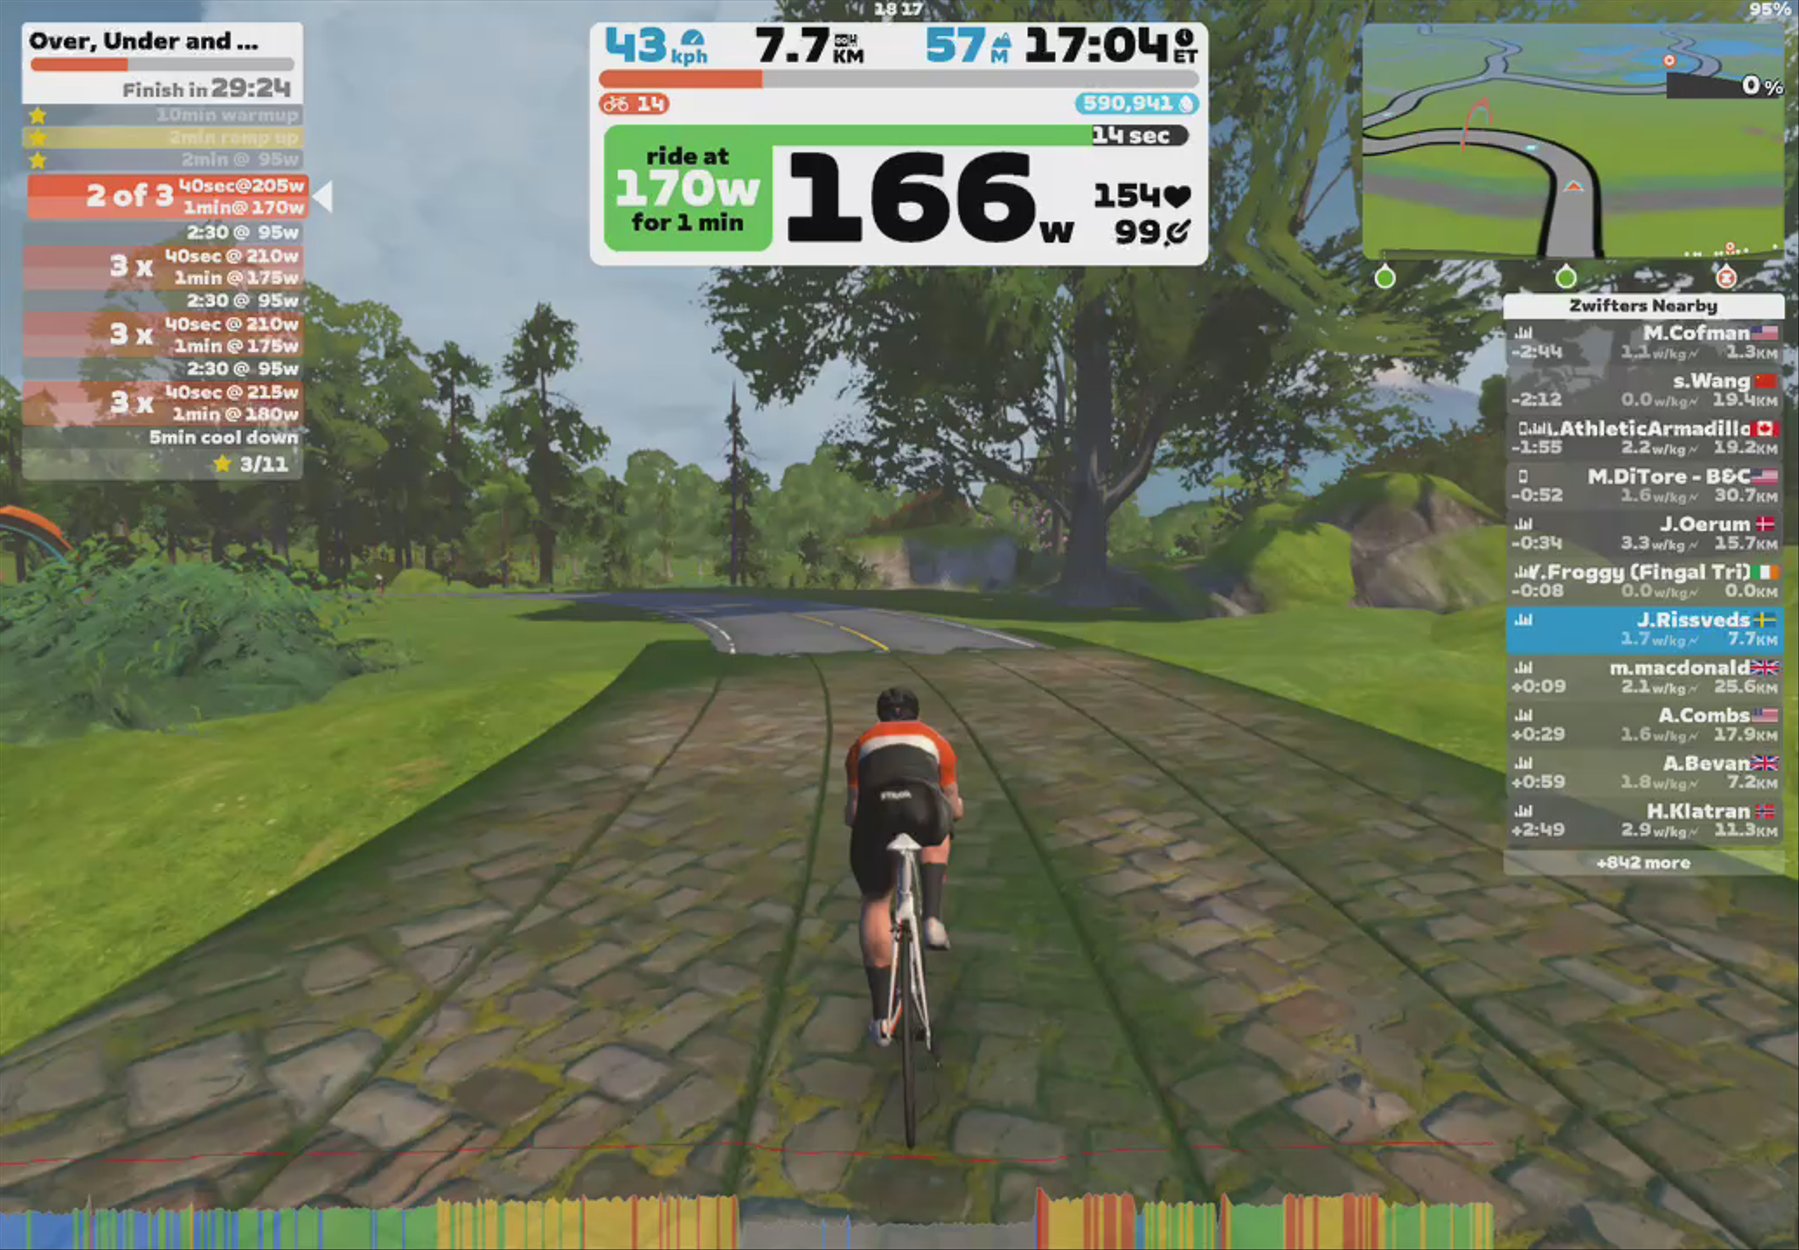 Zwift - Over, Under and Beyond in Makuri Islands